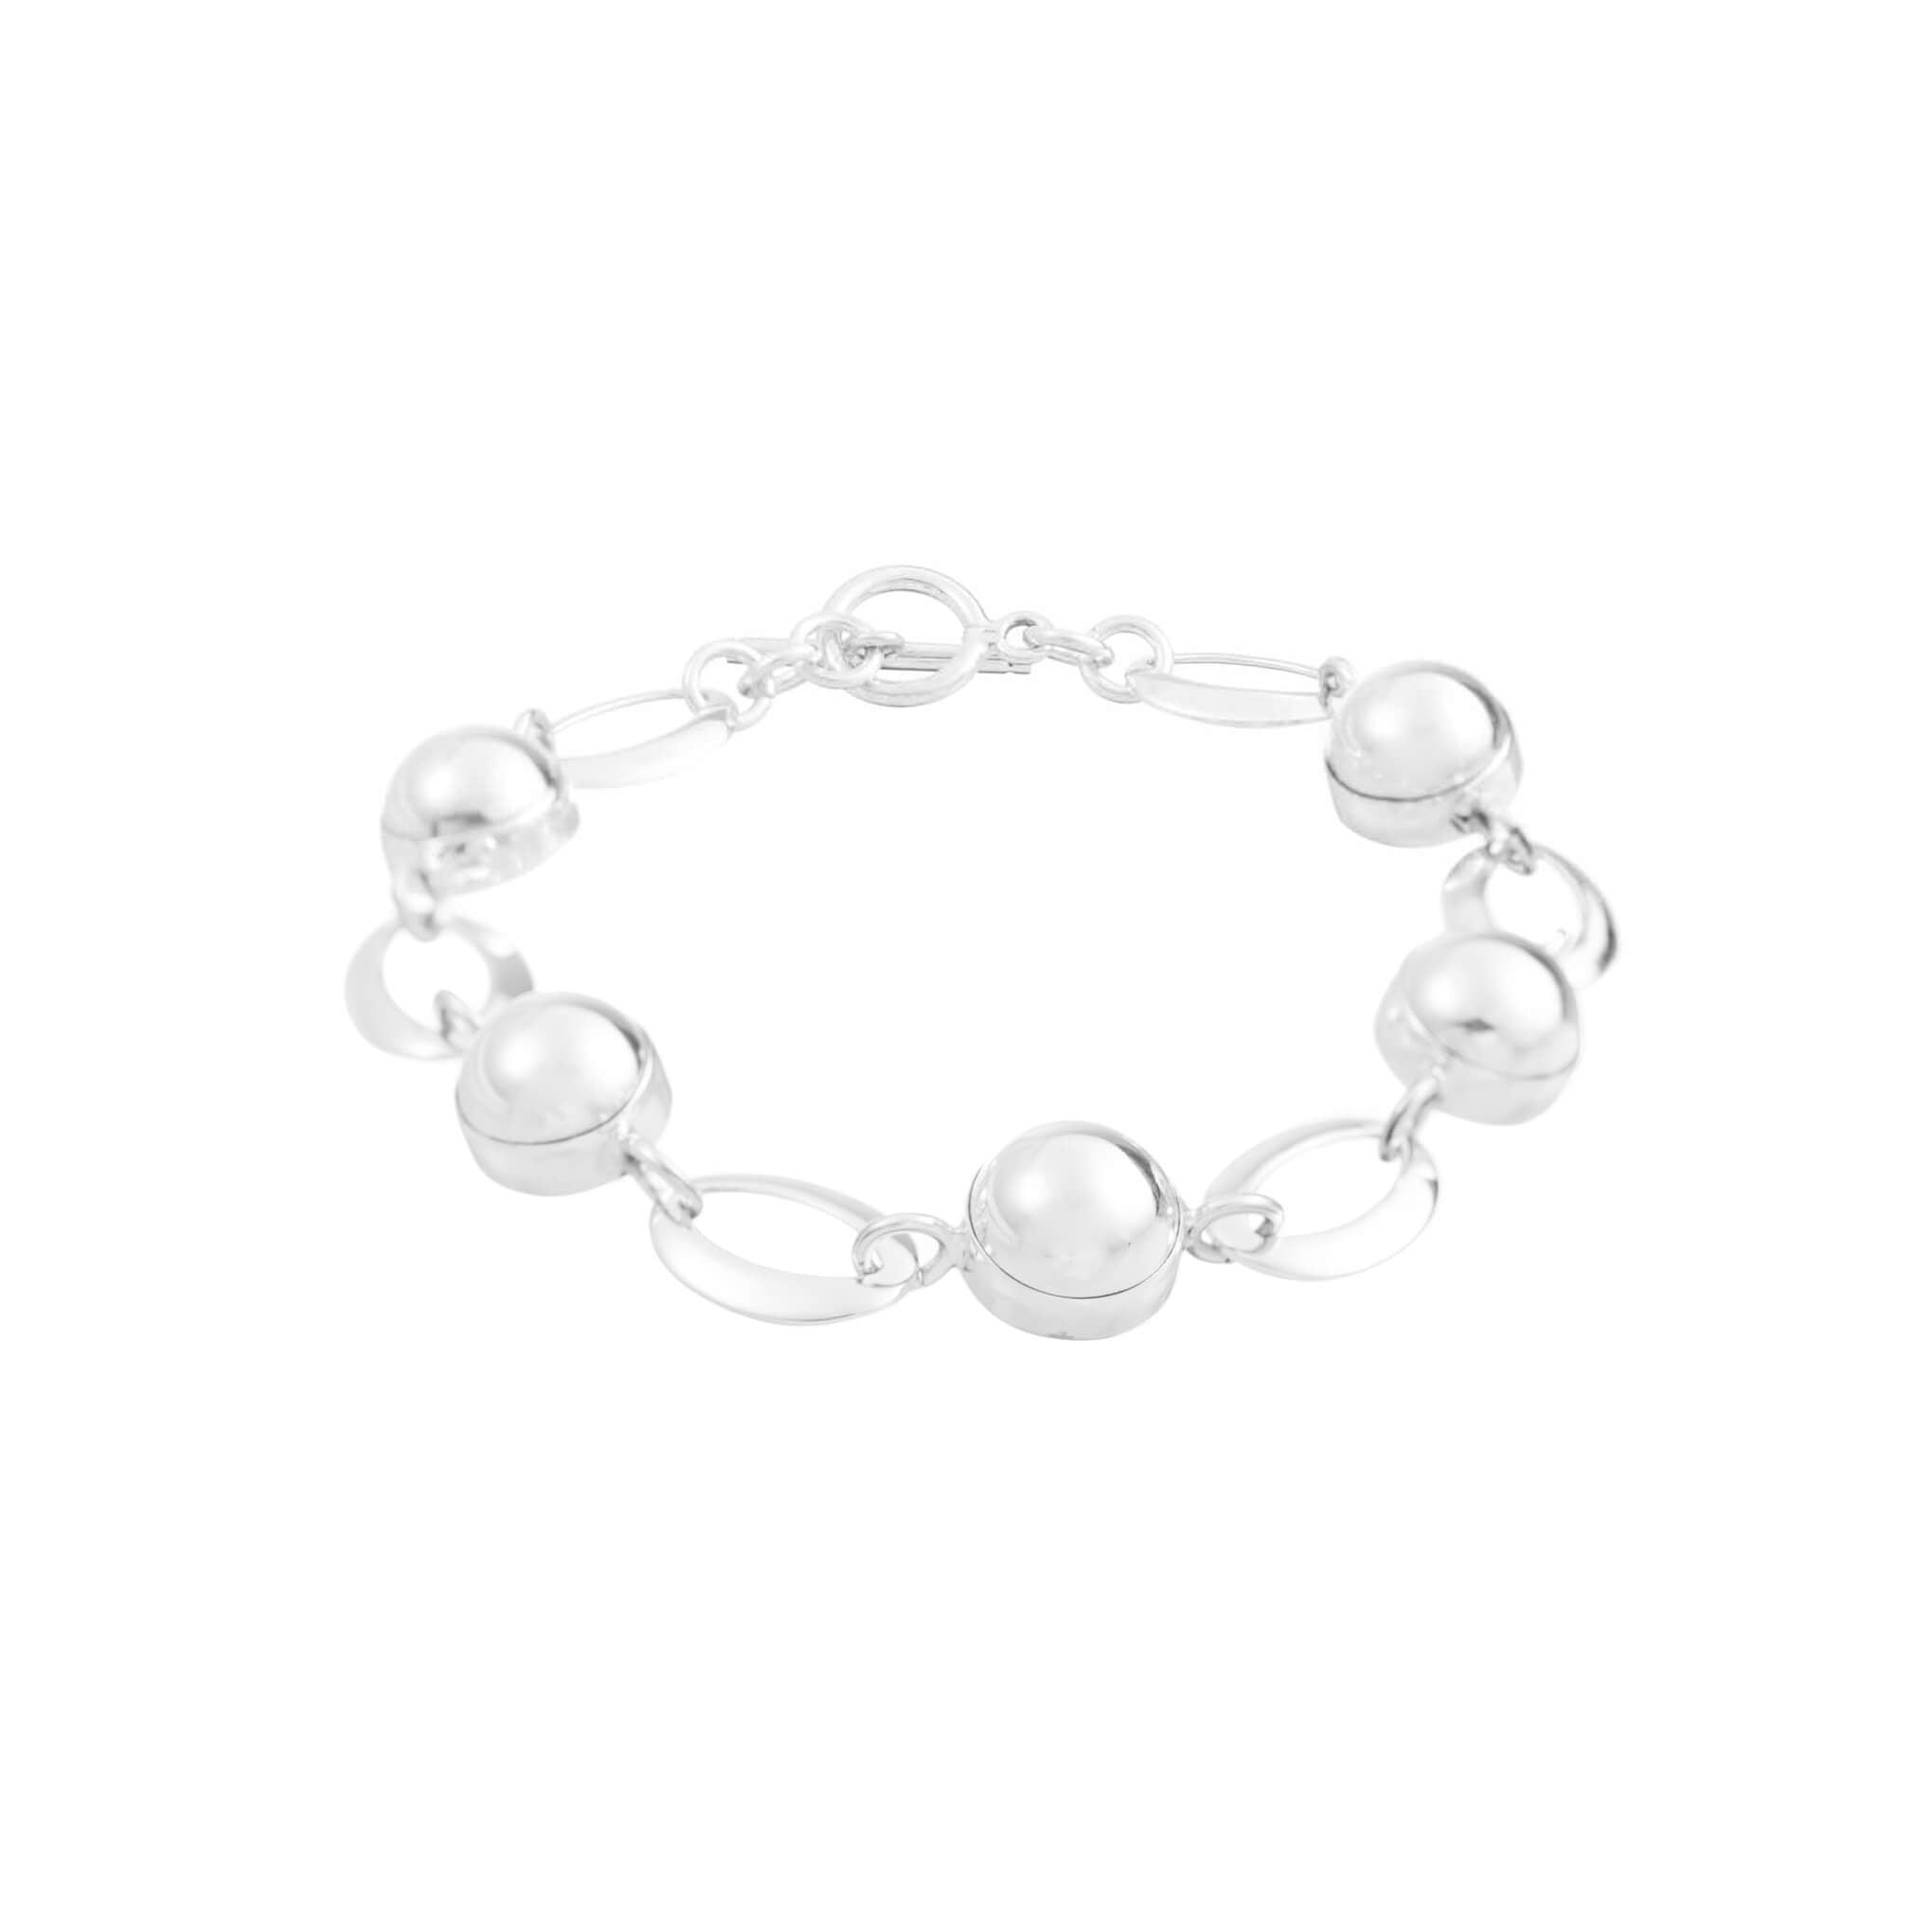 Bracelet of silver ovals and spheres